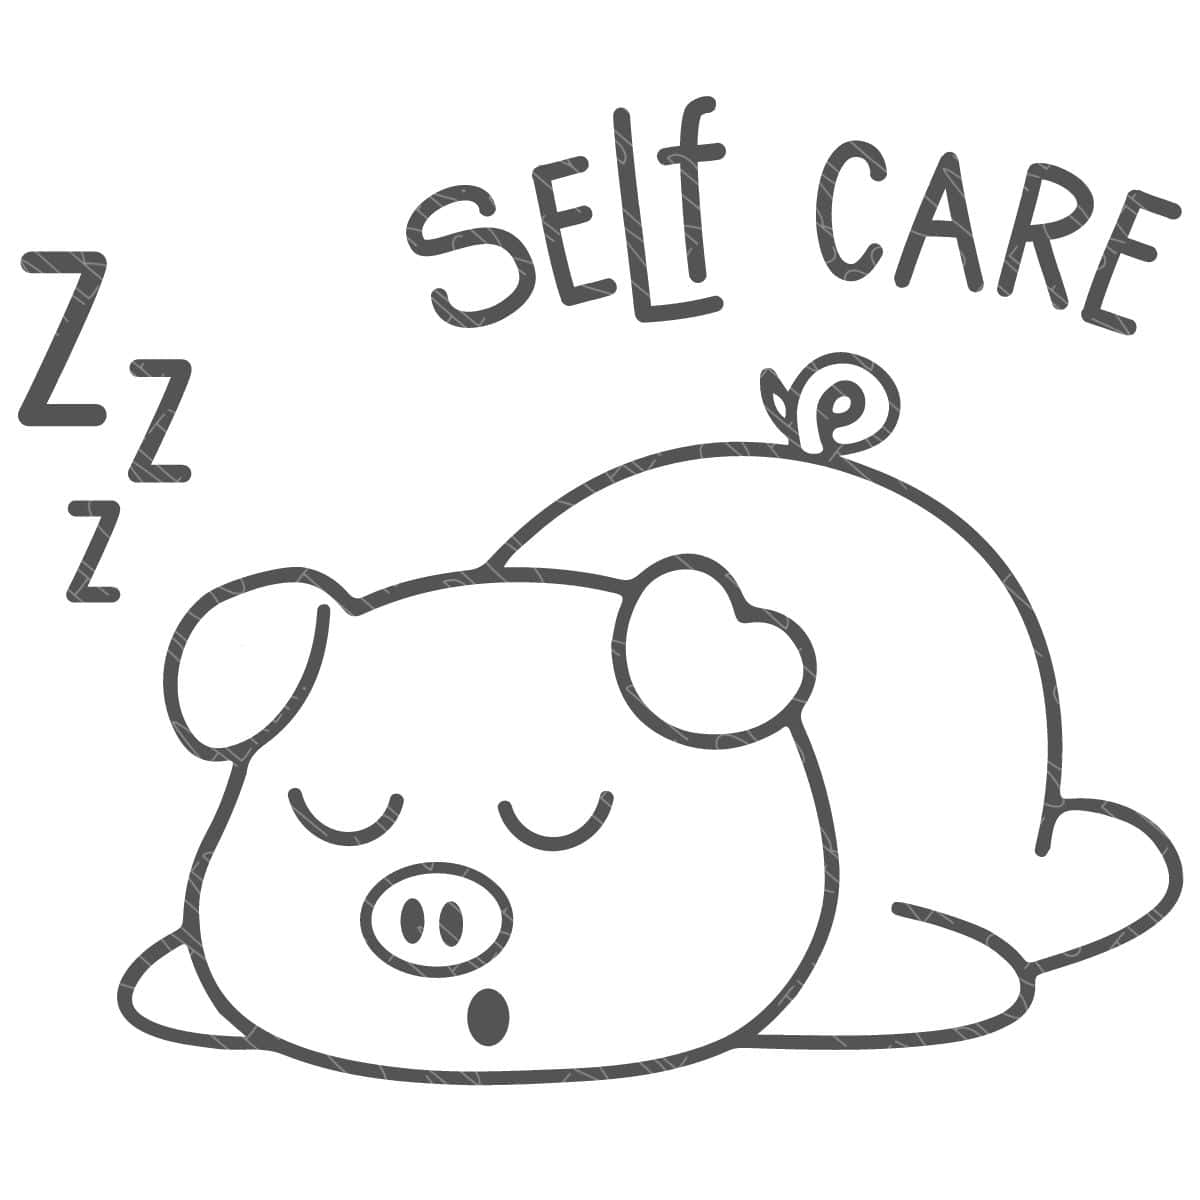 Sleeping Pig Self Care SVG	

			
		
	

		
			$2.50 – Buy Now Checkout
							
					
						
							
						
						Added to cart